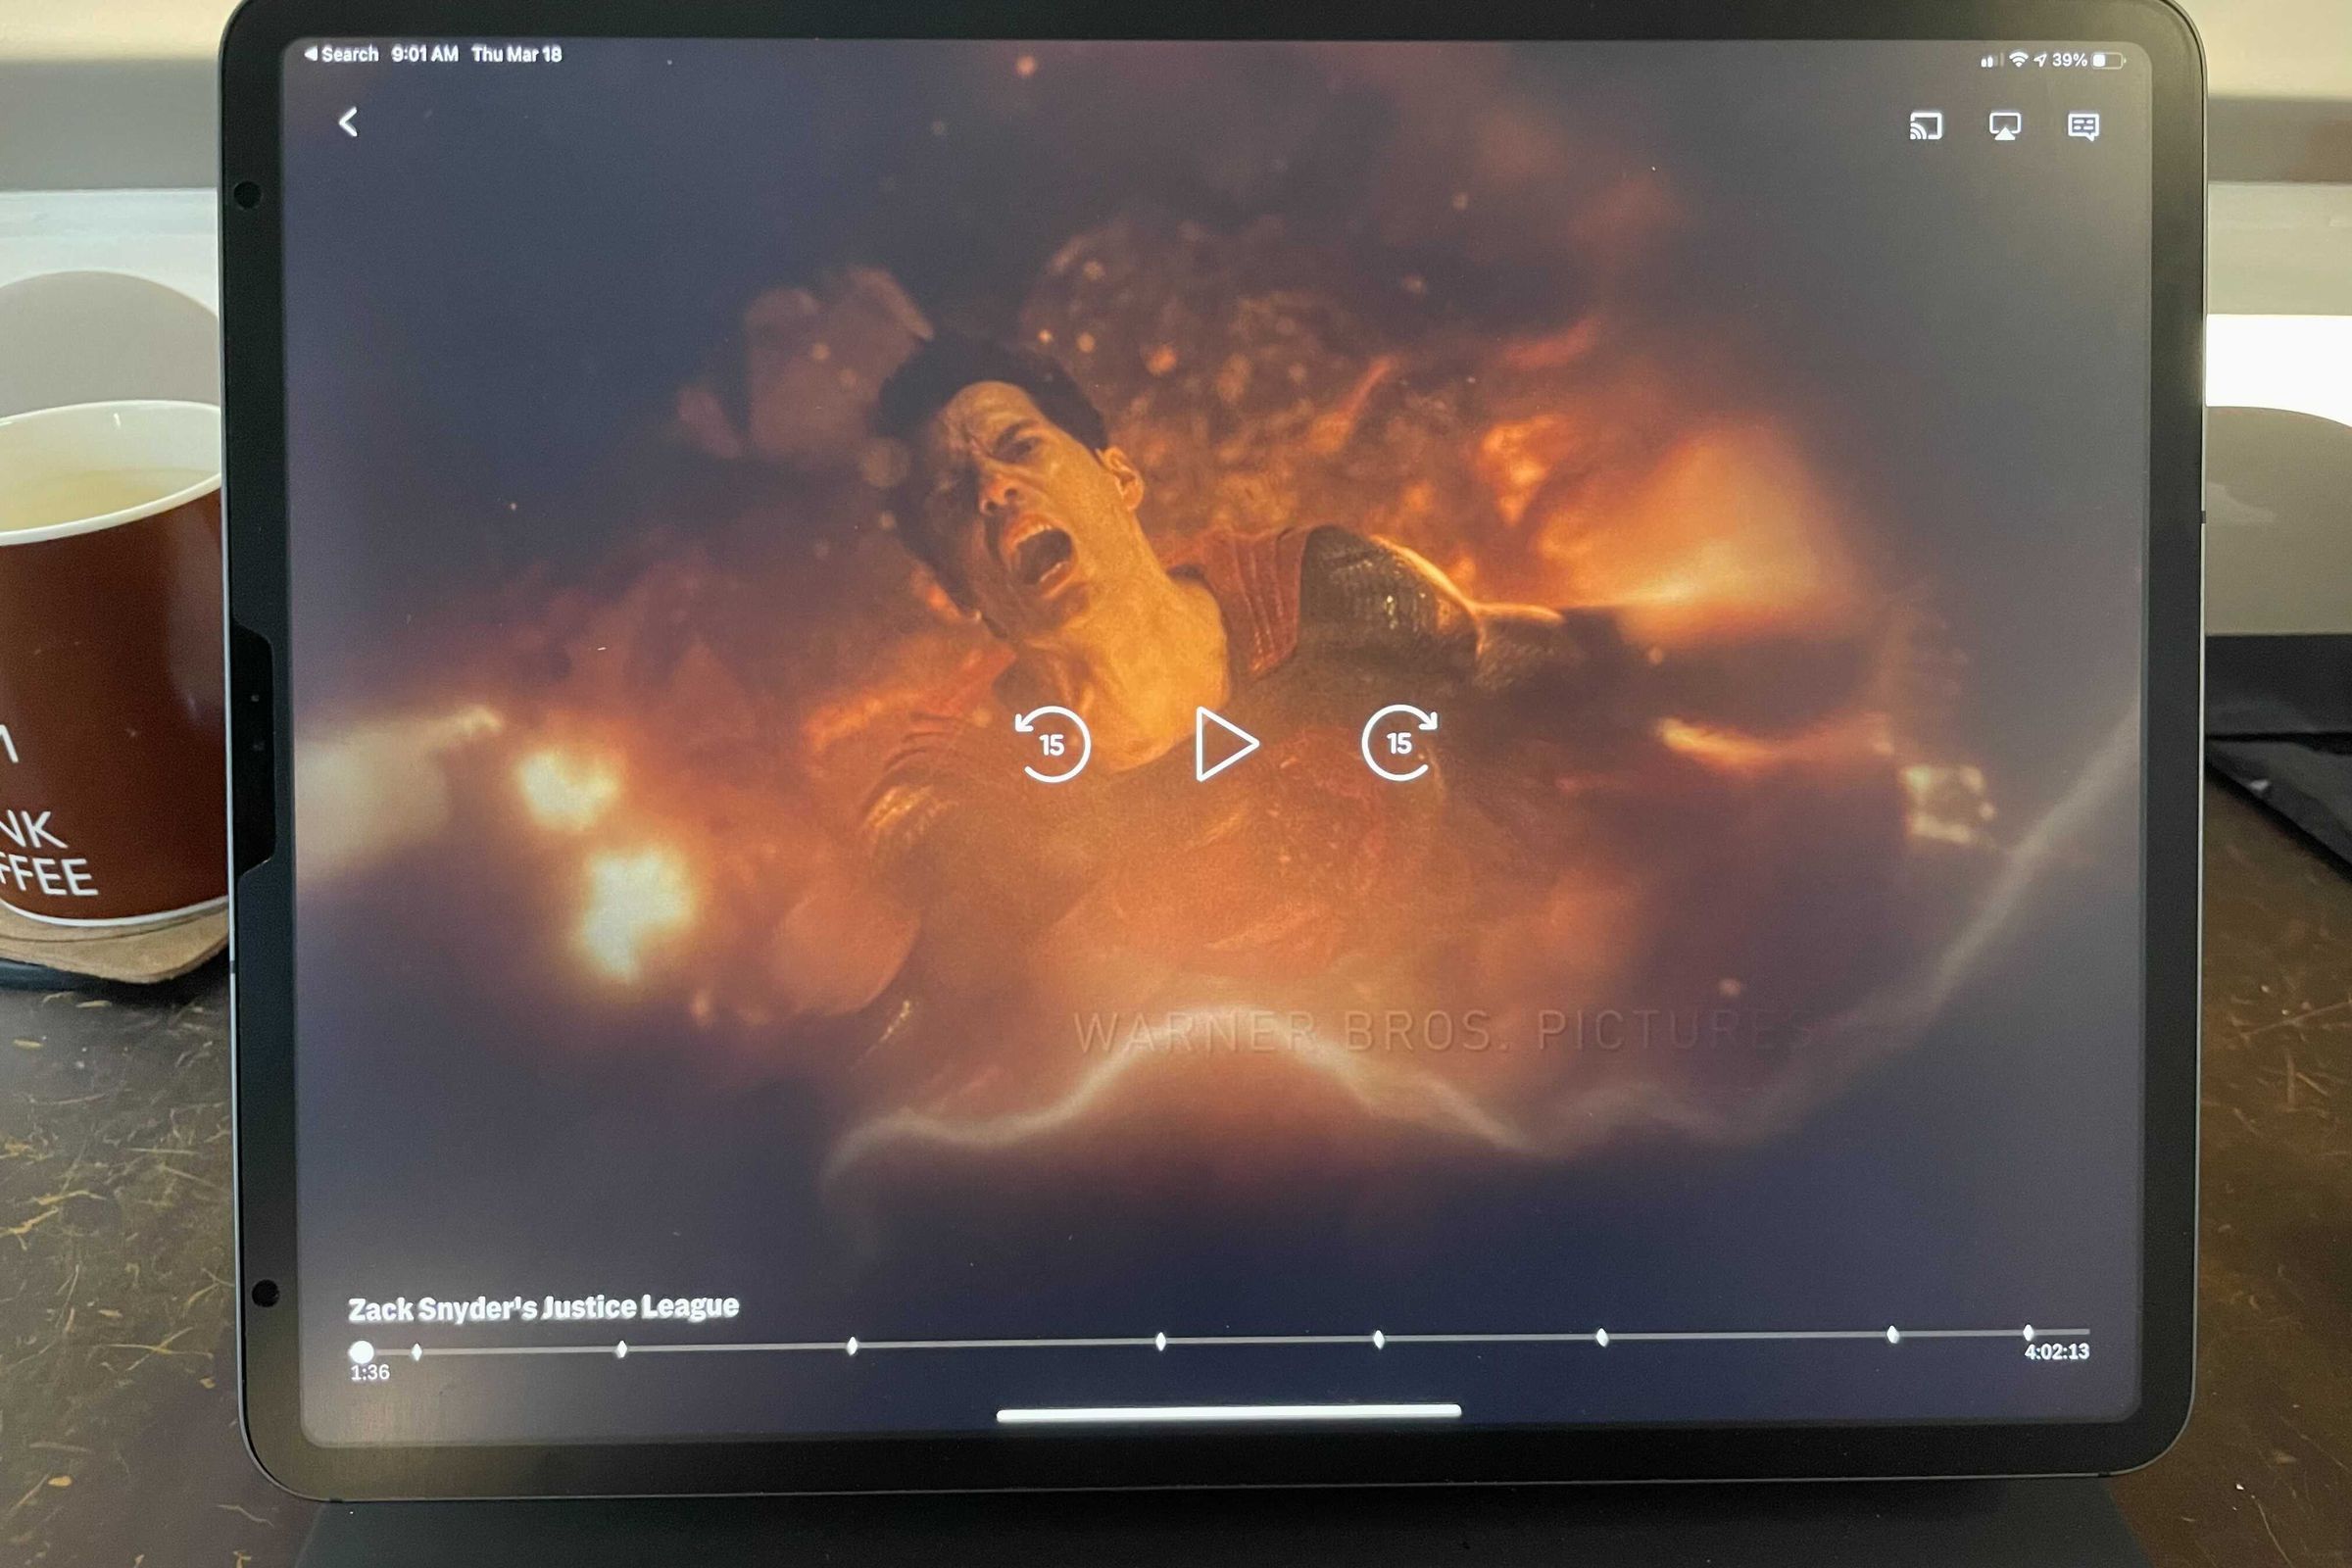 Zack Snyder’s Justice League on 12.9” iPad Pro